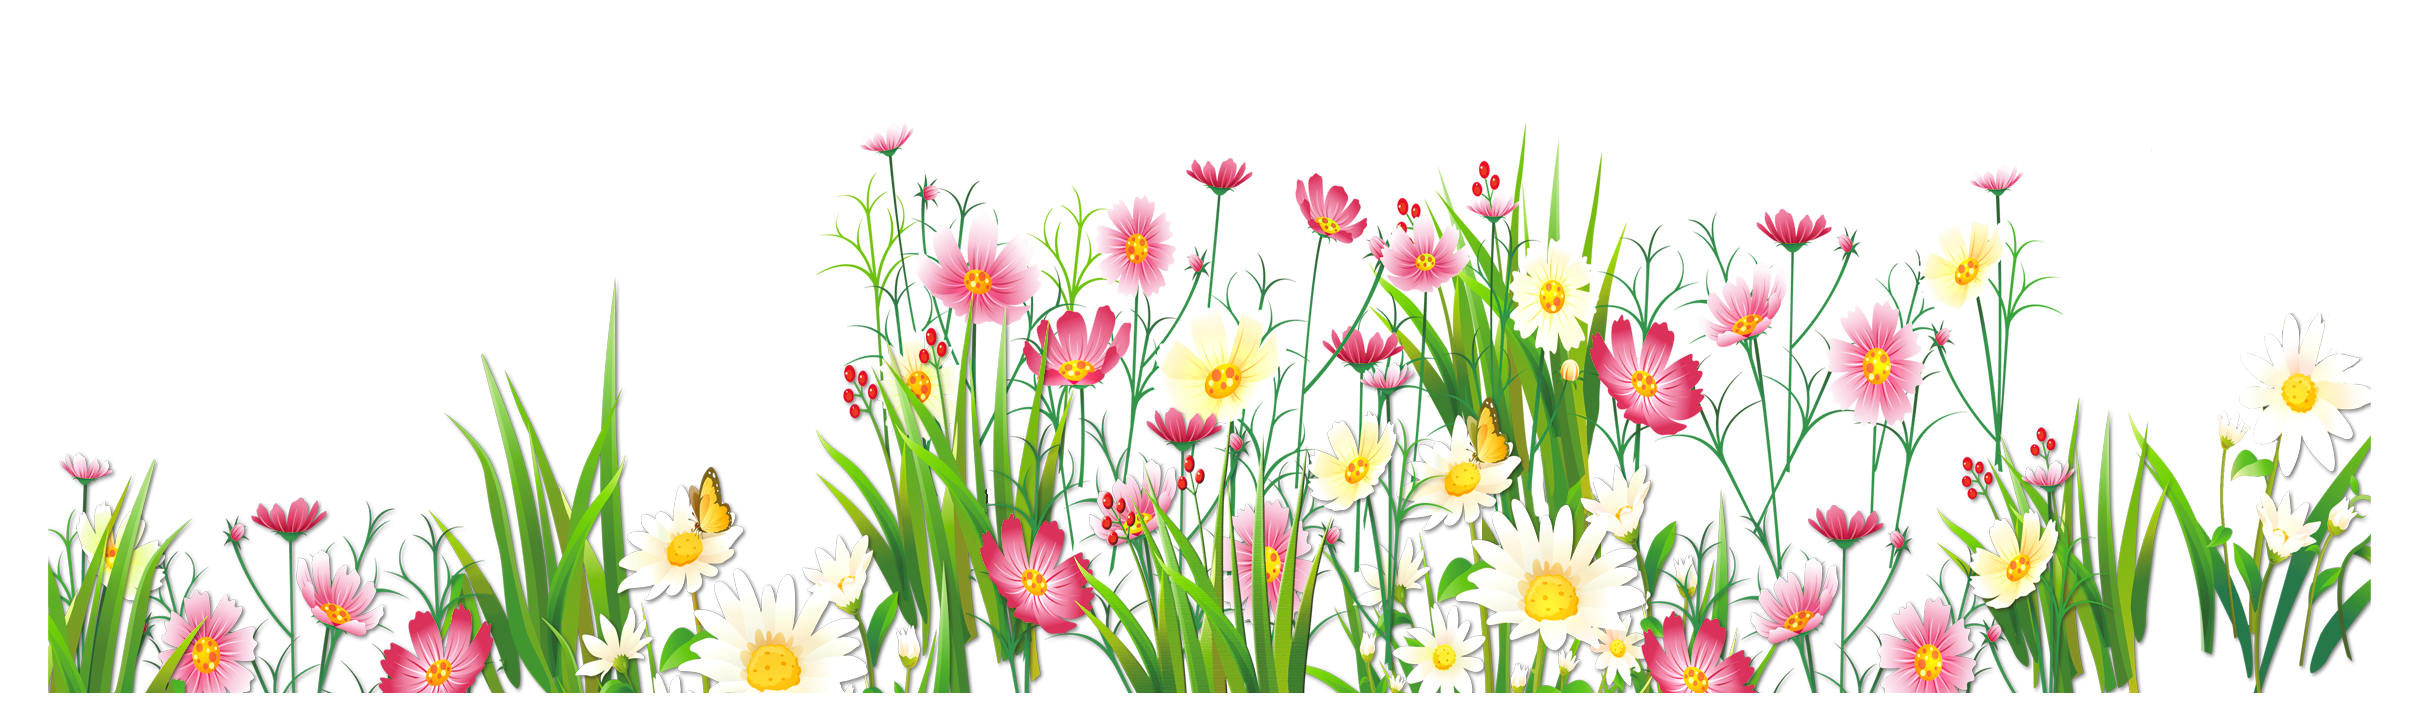 Flowers And Grass Png Picture Clipart Gallery Yopriceville High Quality Images And Transparent Png Free Clipart